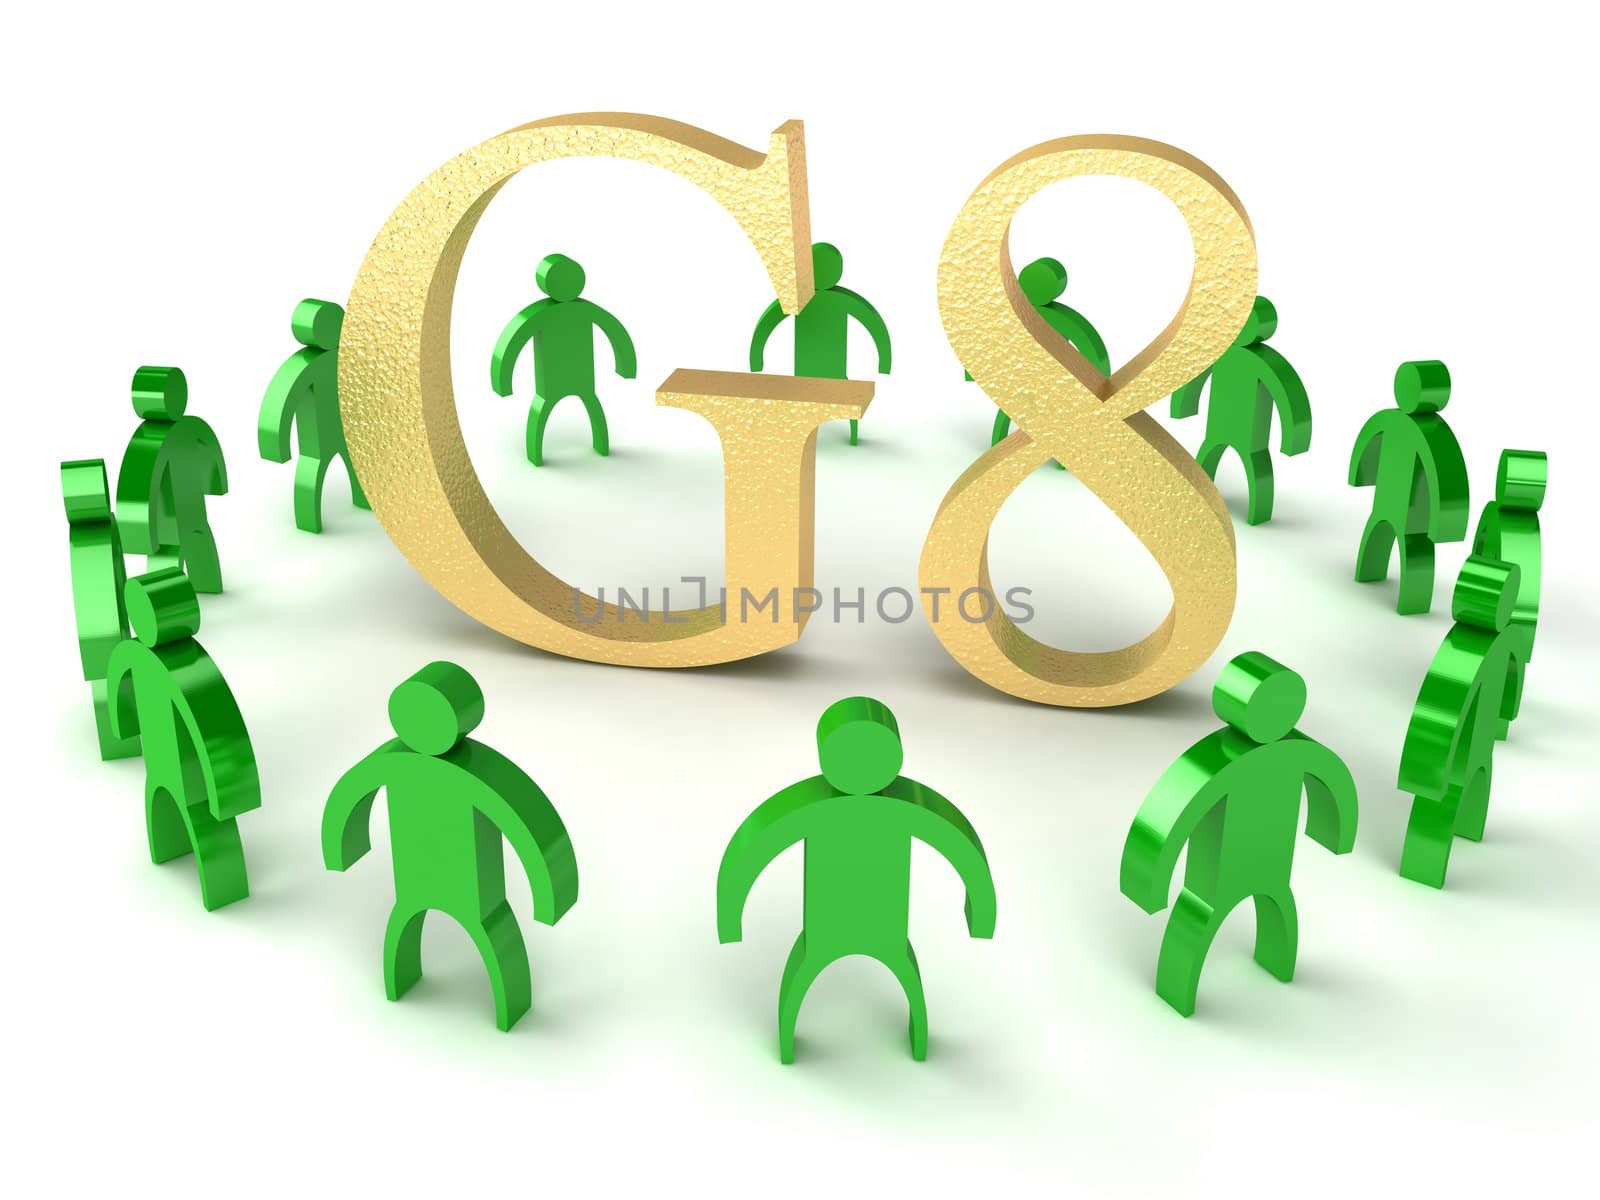 Abstract G8. Antiglobalists and Group of Eight on a white background.